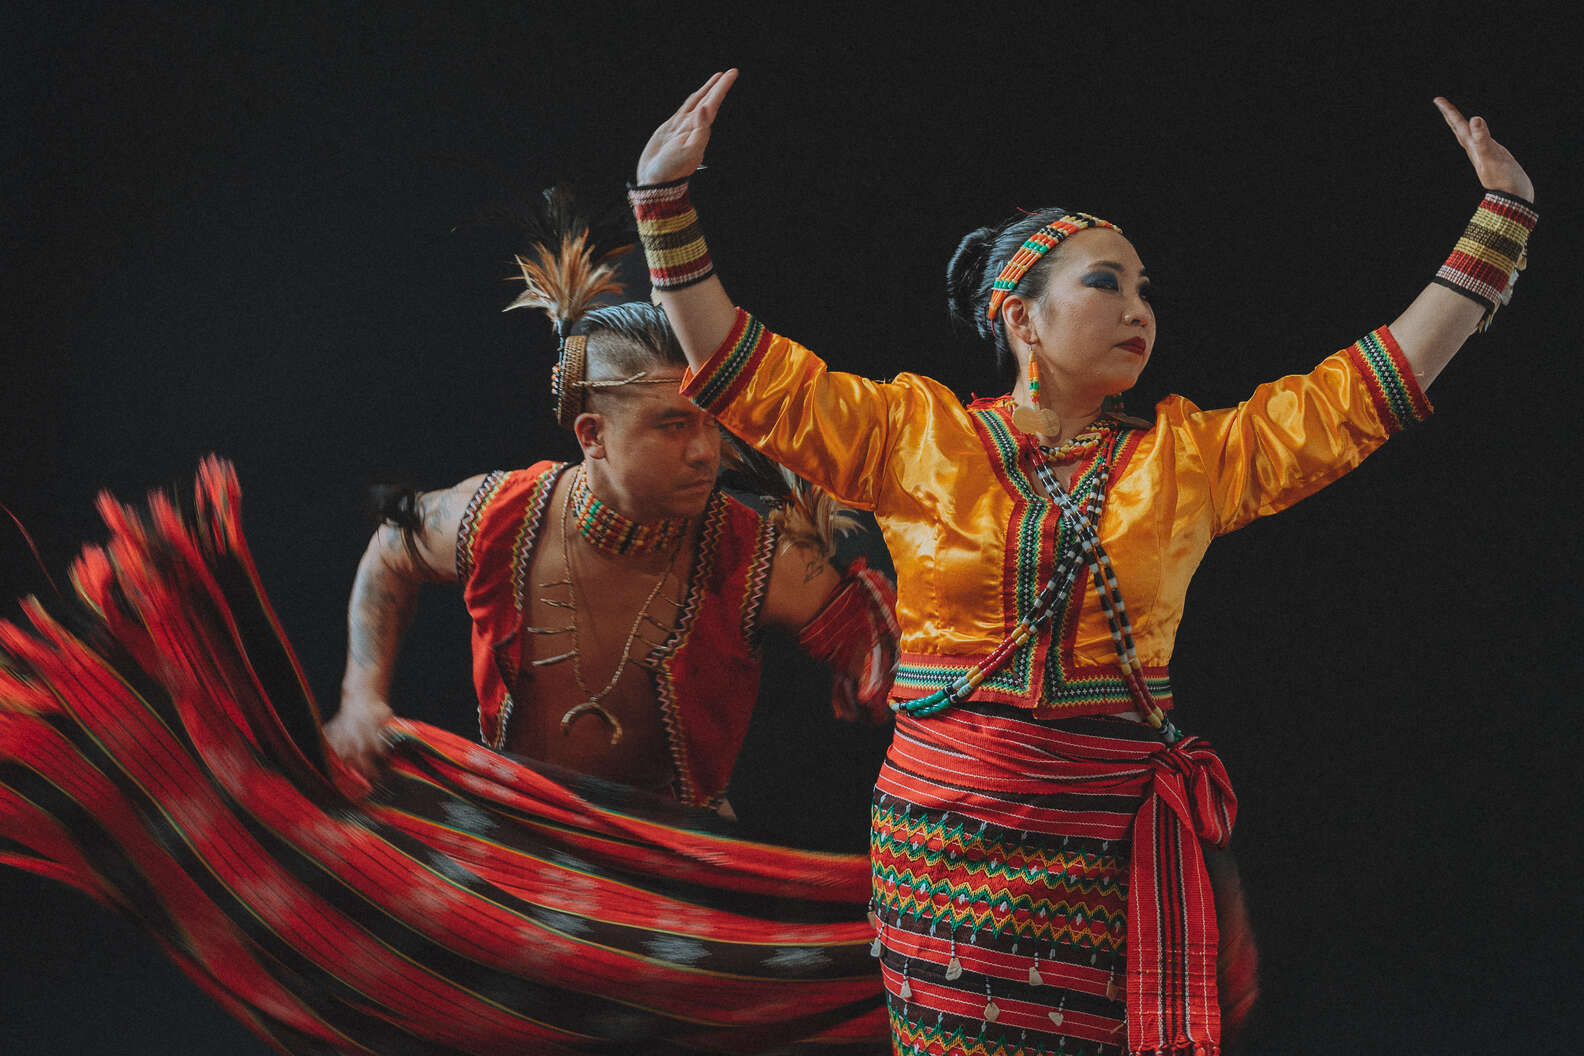 Photo by Francis Gum, courtesy of Parangal Dance Company